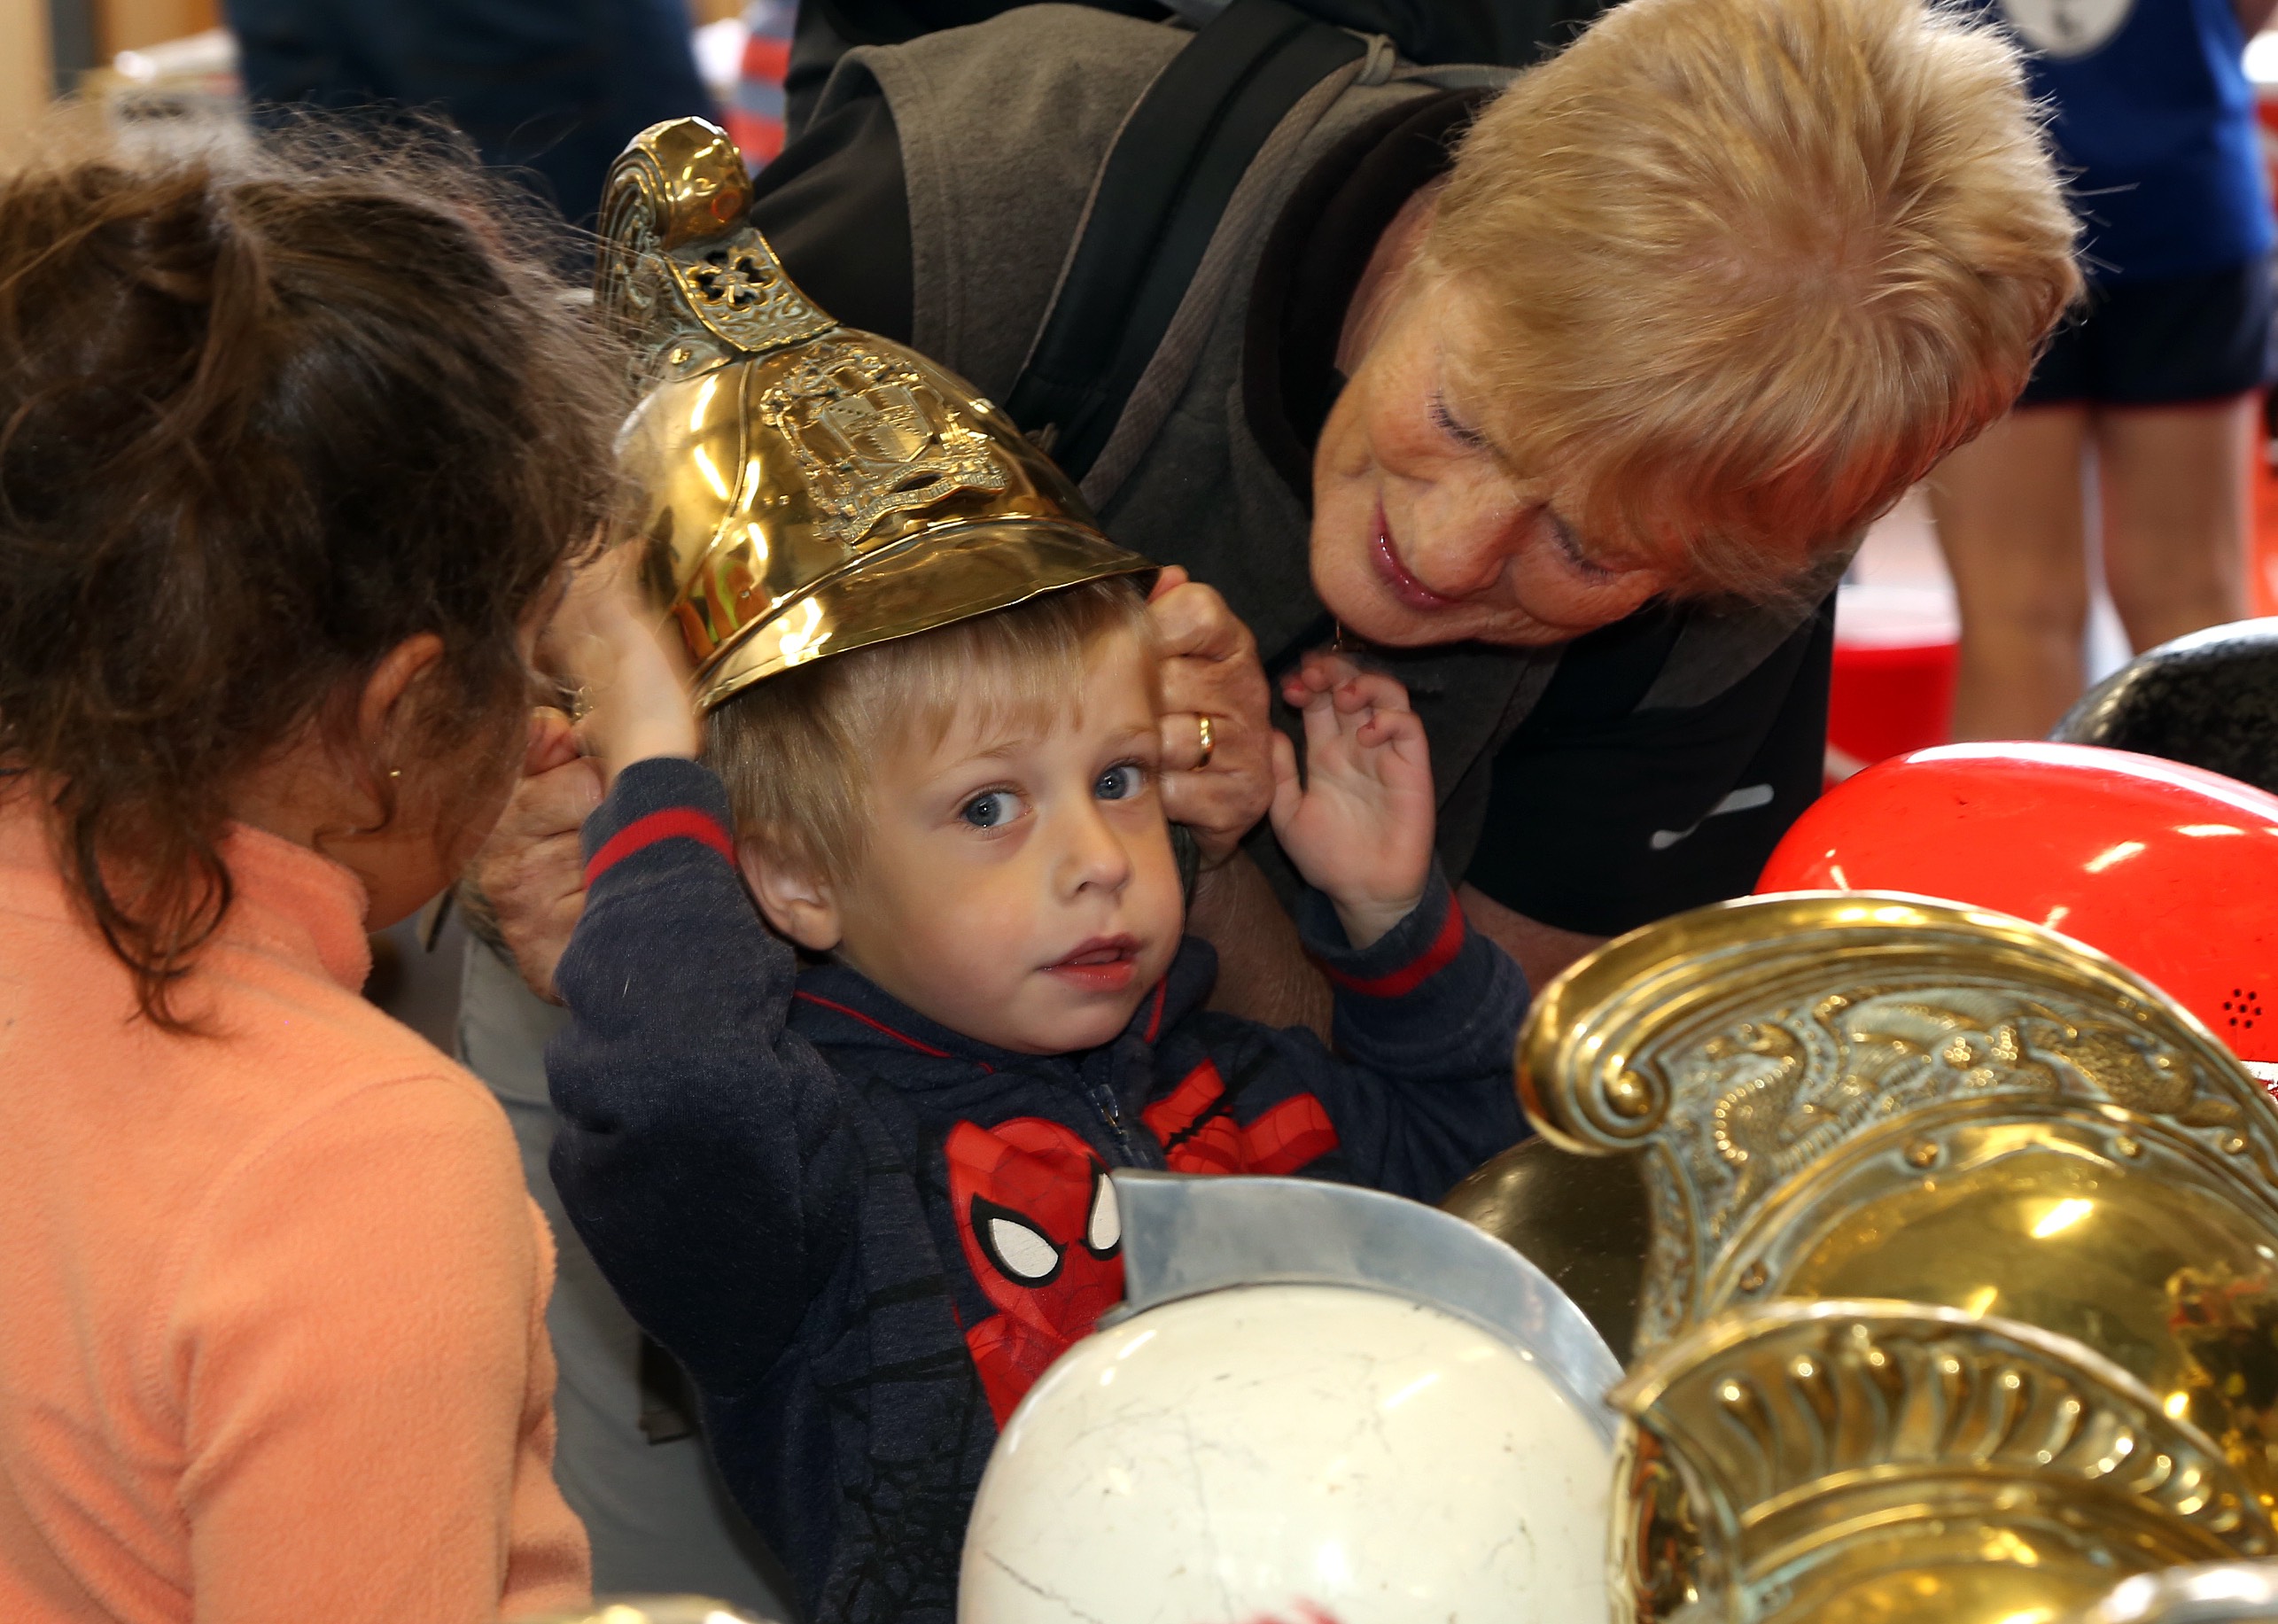 Ben Jones (aged 3) tries on a firefighter’s helmet for size pictured with his grandmother Sue Challinor, from Shrewsbury.